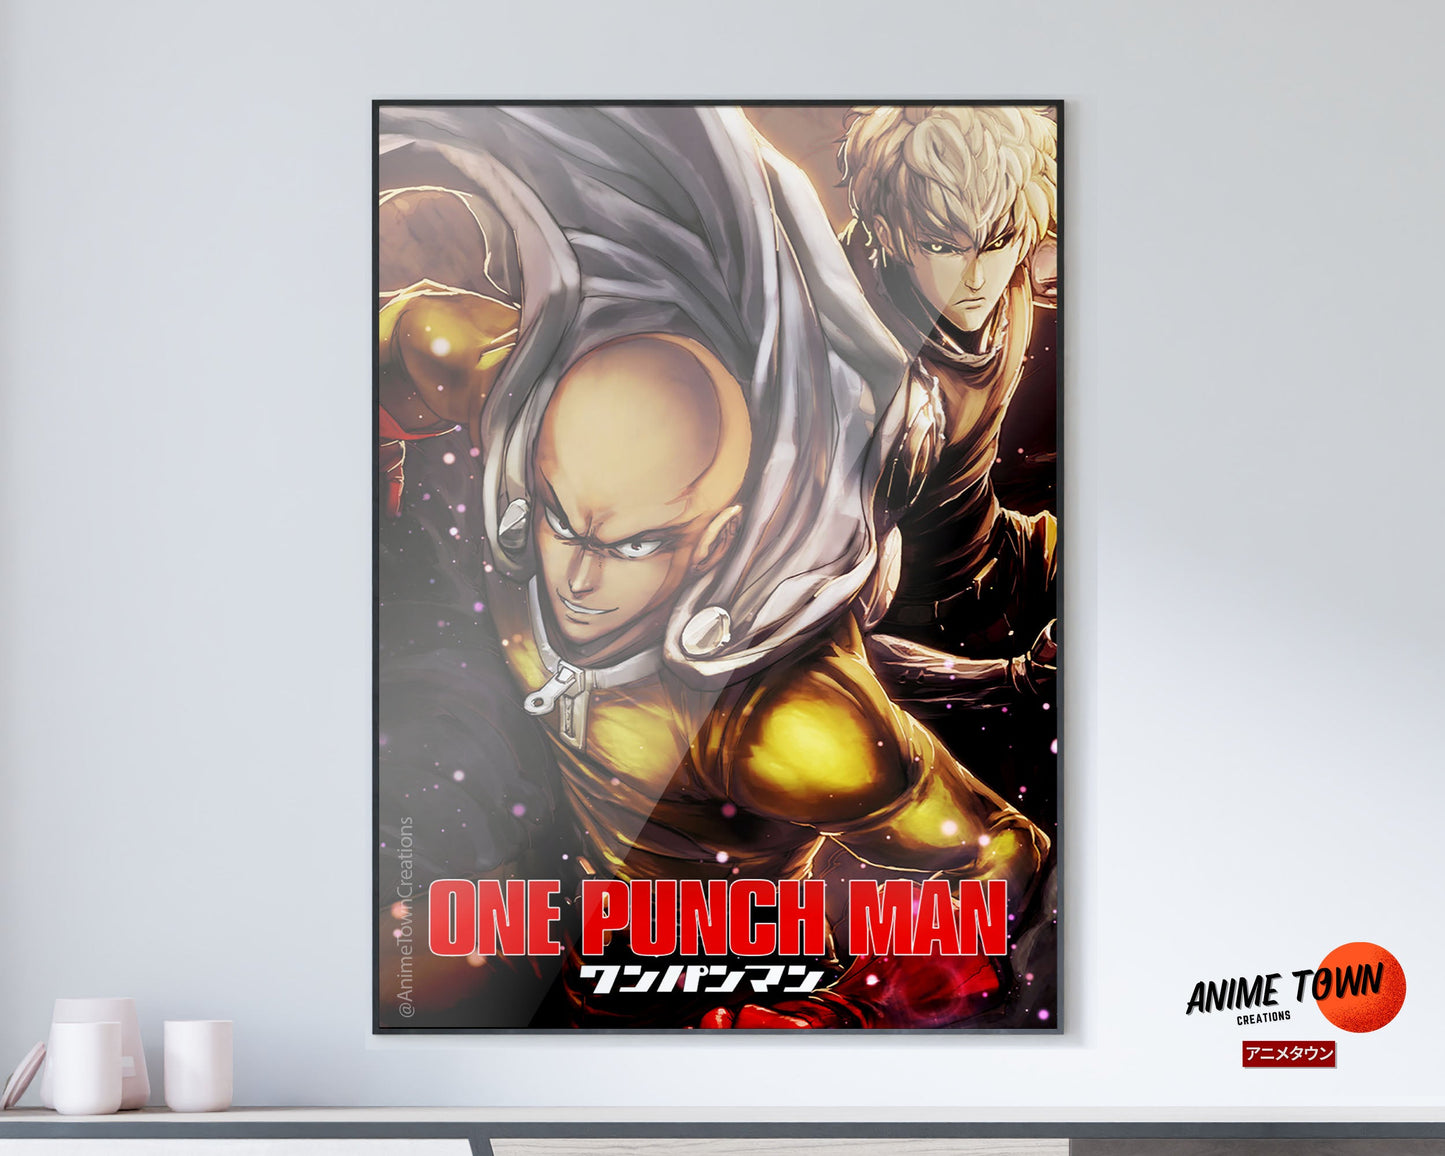 Anime Town Creations Poster One Punch Man 5" x 7" Home Goods - Anime One Punch Man Poster